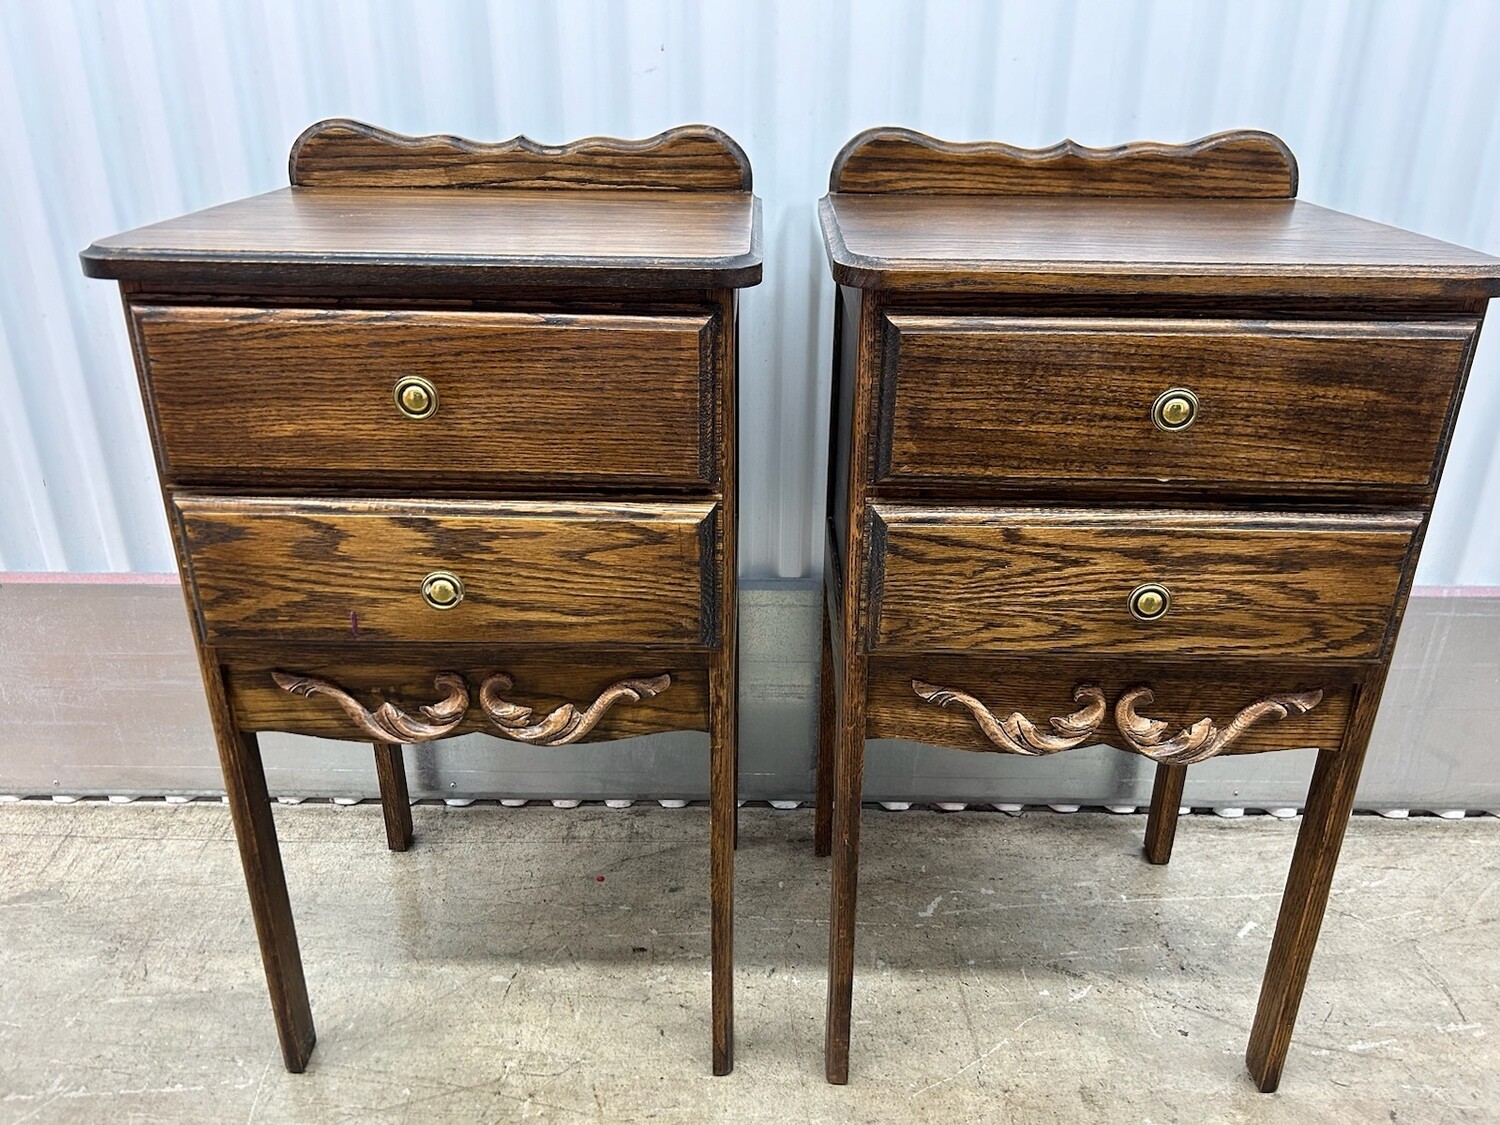 Matching Dark Oak End Tables, solid wood #2126 ** 1 day to sell, full price